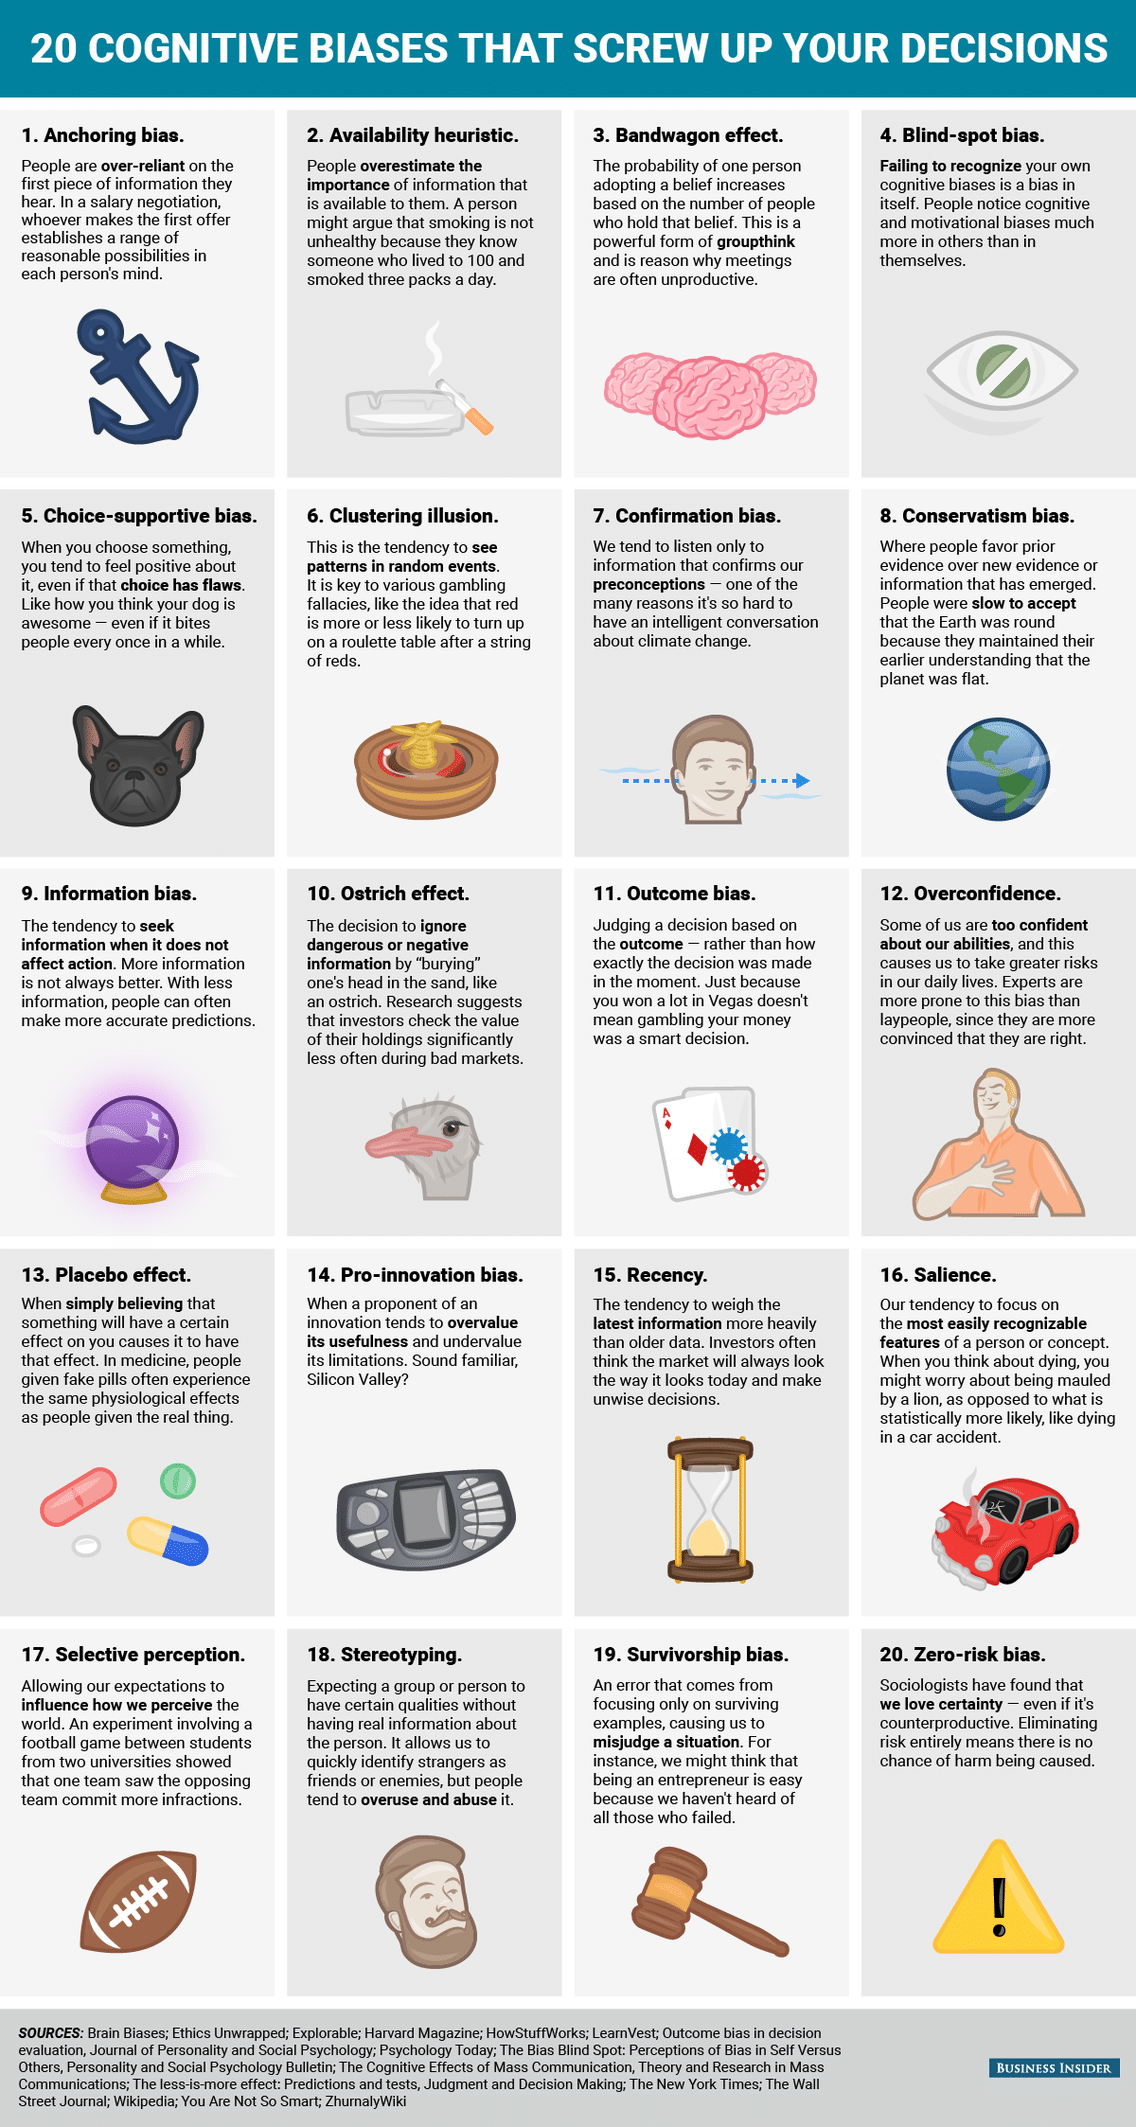 A graphic about cognitive biases from Business Insider